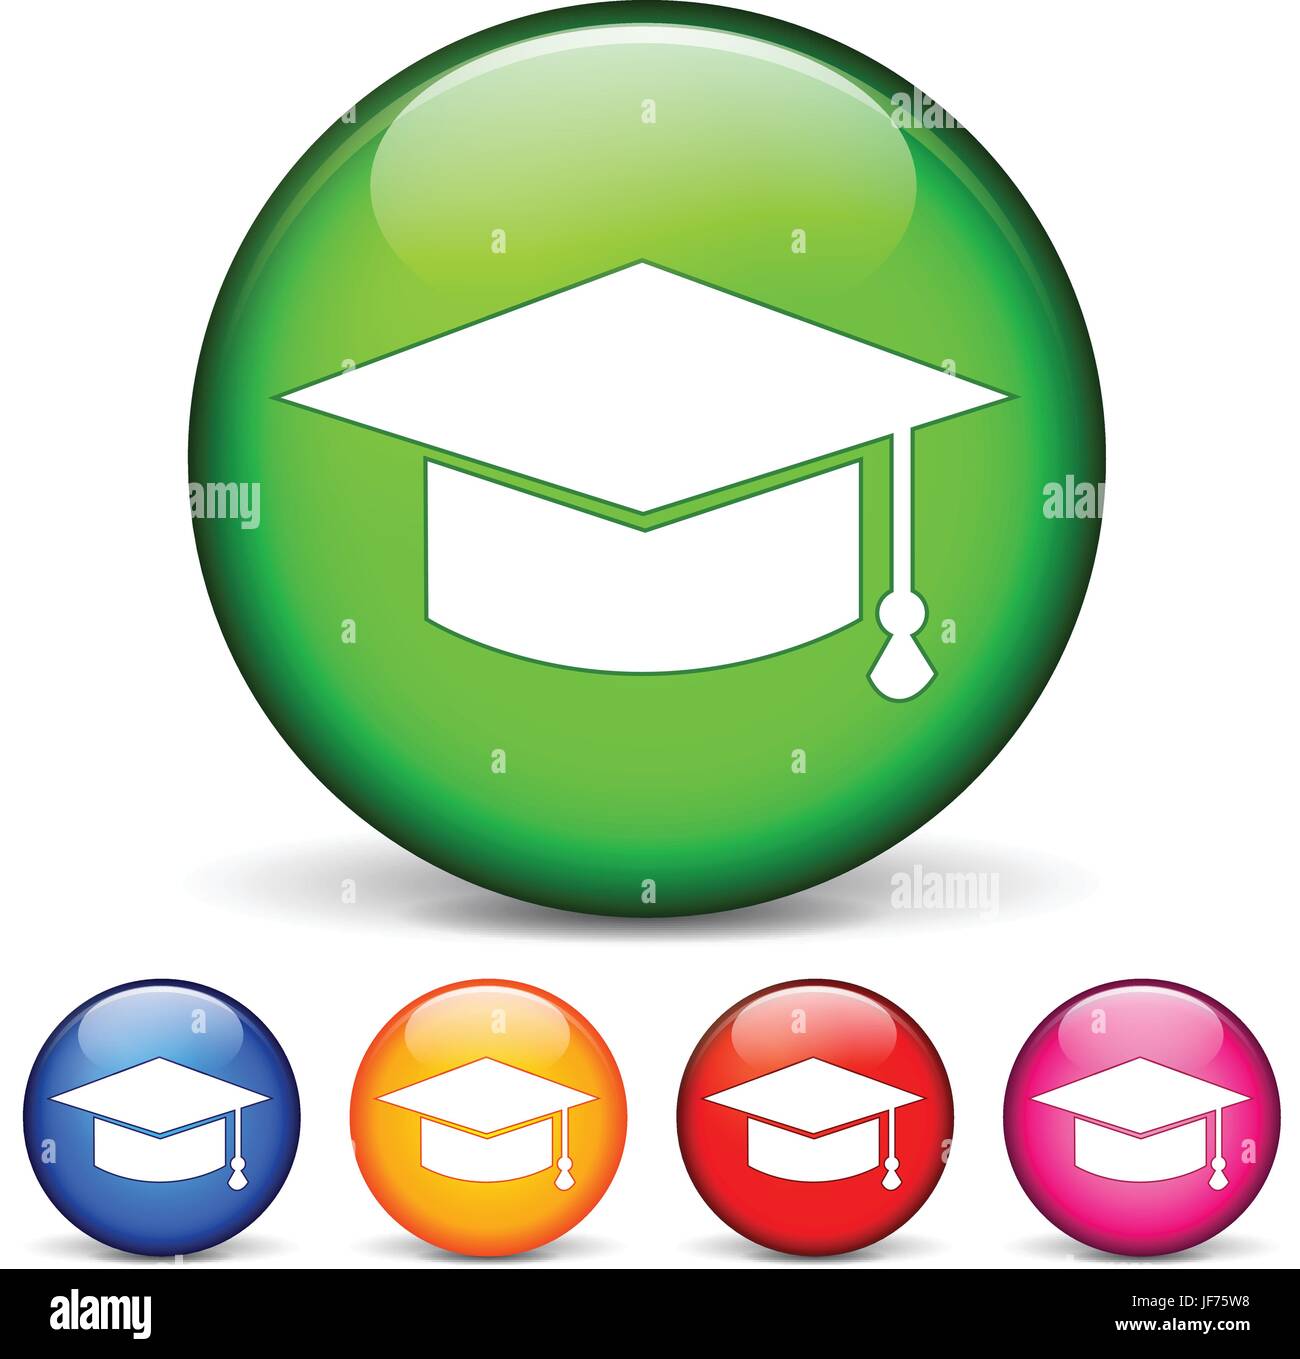 education, button, university, educational institution, educational Stock Vector